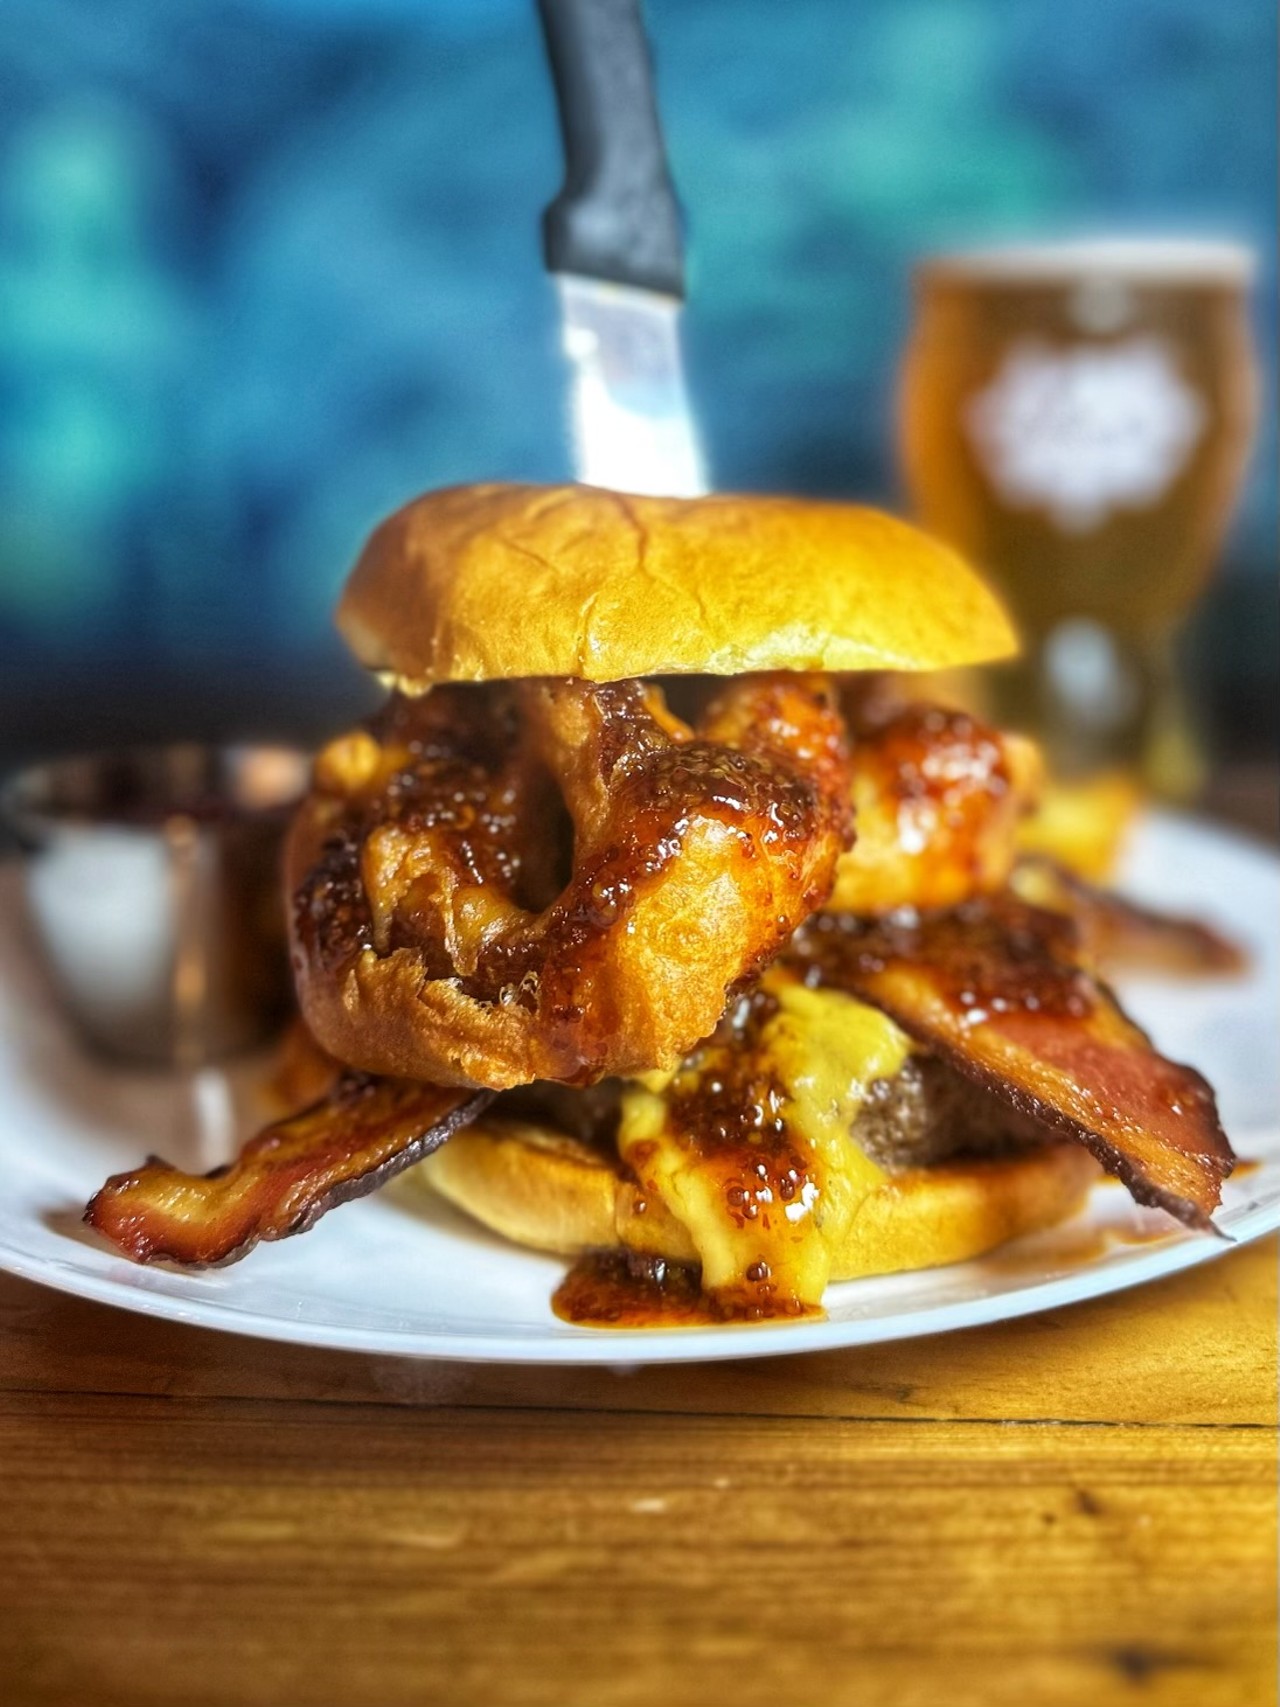 Dos Sirenos
231 E Cevallos St
$12 Triple Beer Brewhouse Burger6oz Texas wagyu patty, beer cheese, beer bacon, beer battered onion ring, chipotle honey mustard on a challah bun.